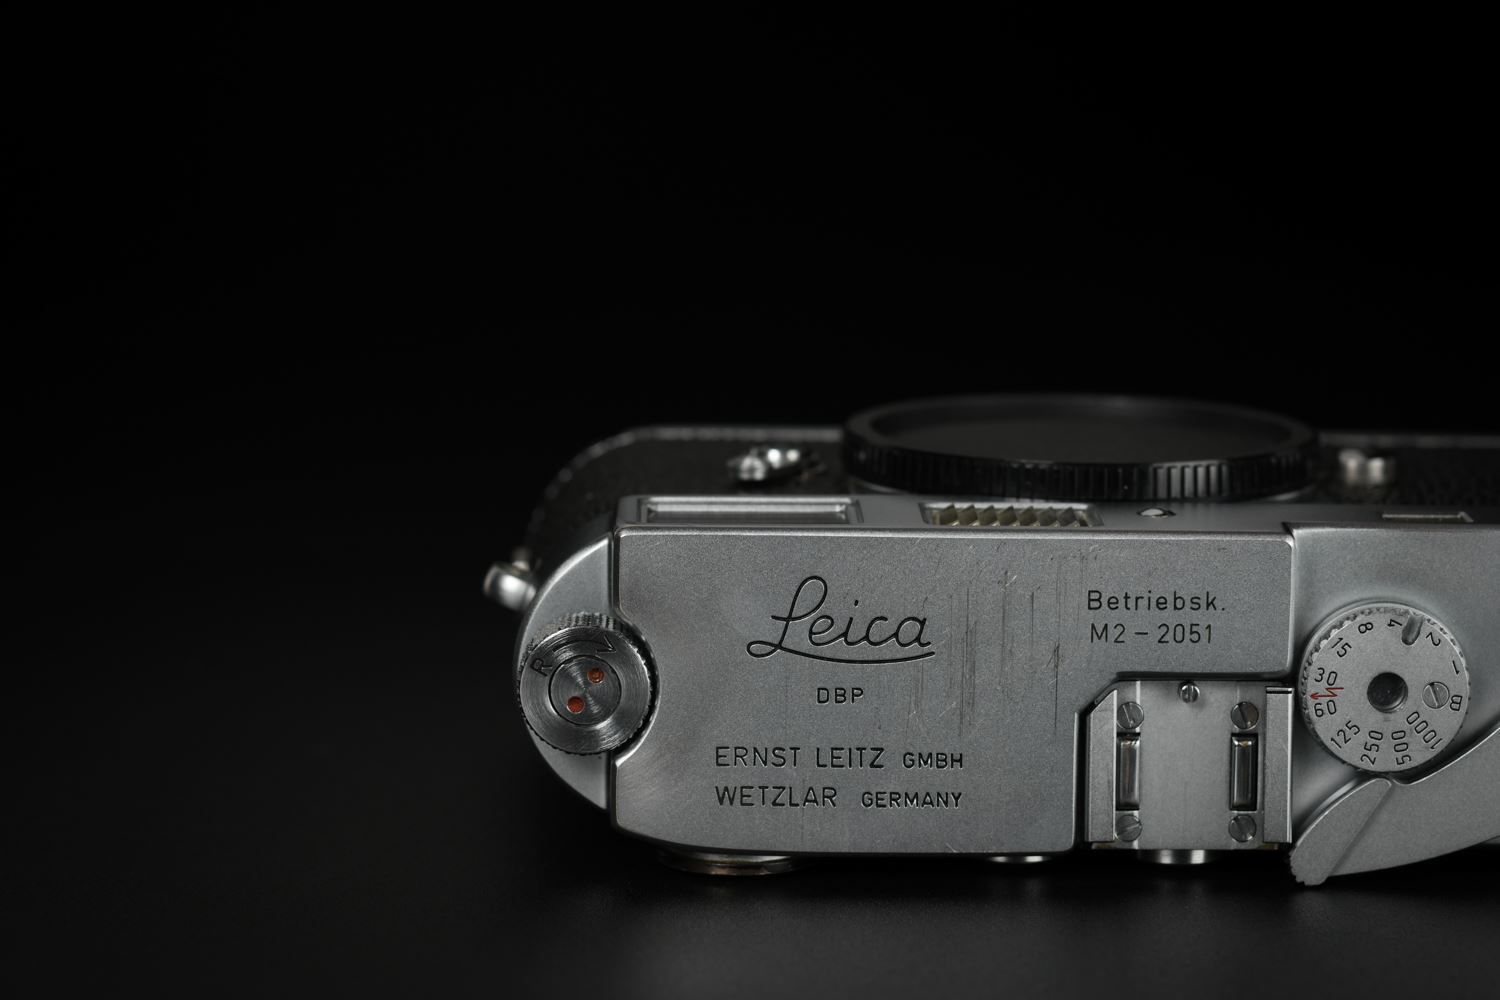 Picture of Leica M2 Betriebsk. Silver